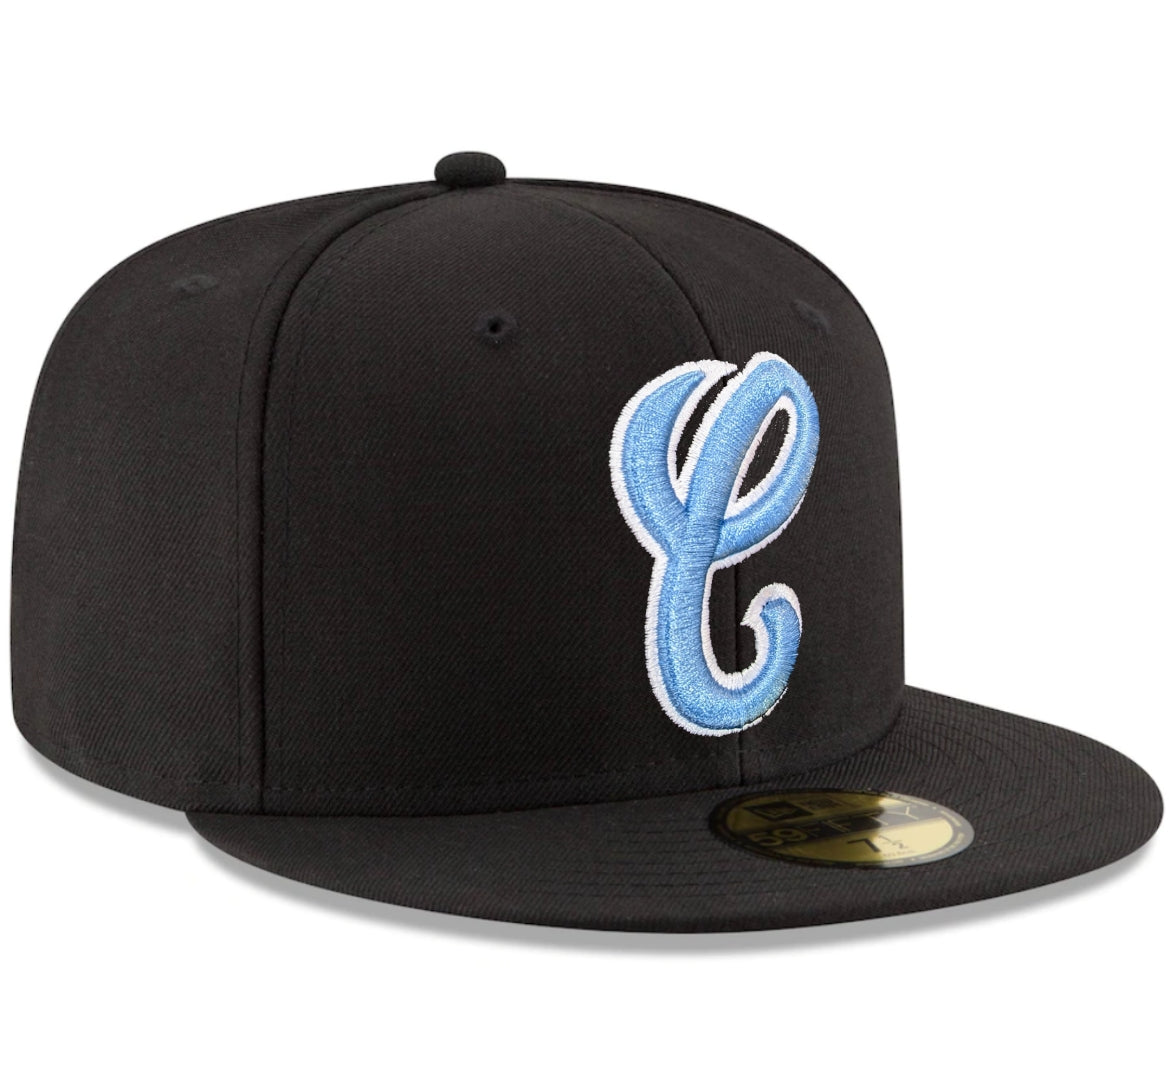 Men's Chicago White Sox New Era Cooperstown Collection 1987 Black and Carolina Blue 59FIFTY Fitted Hat